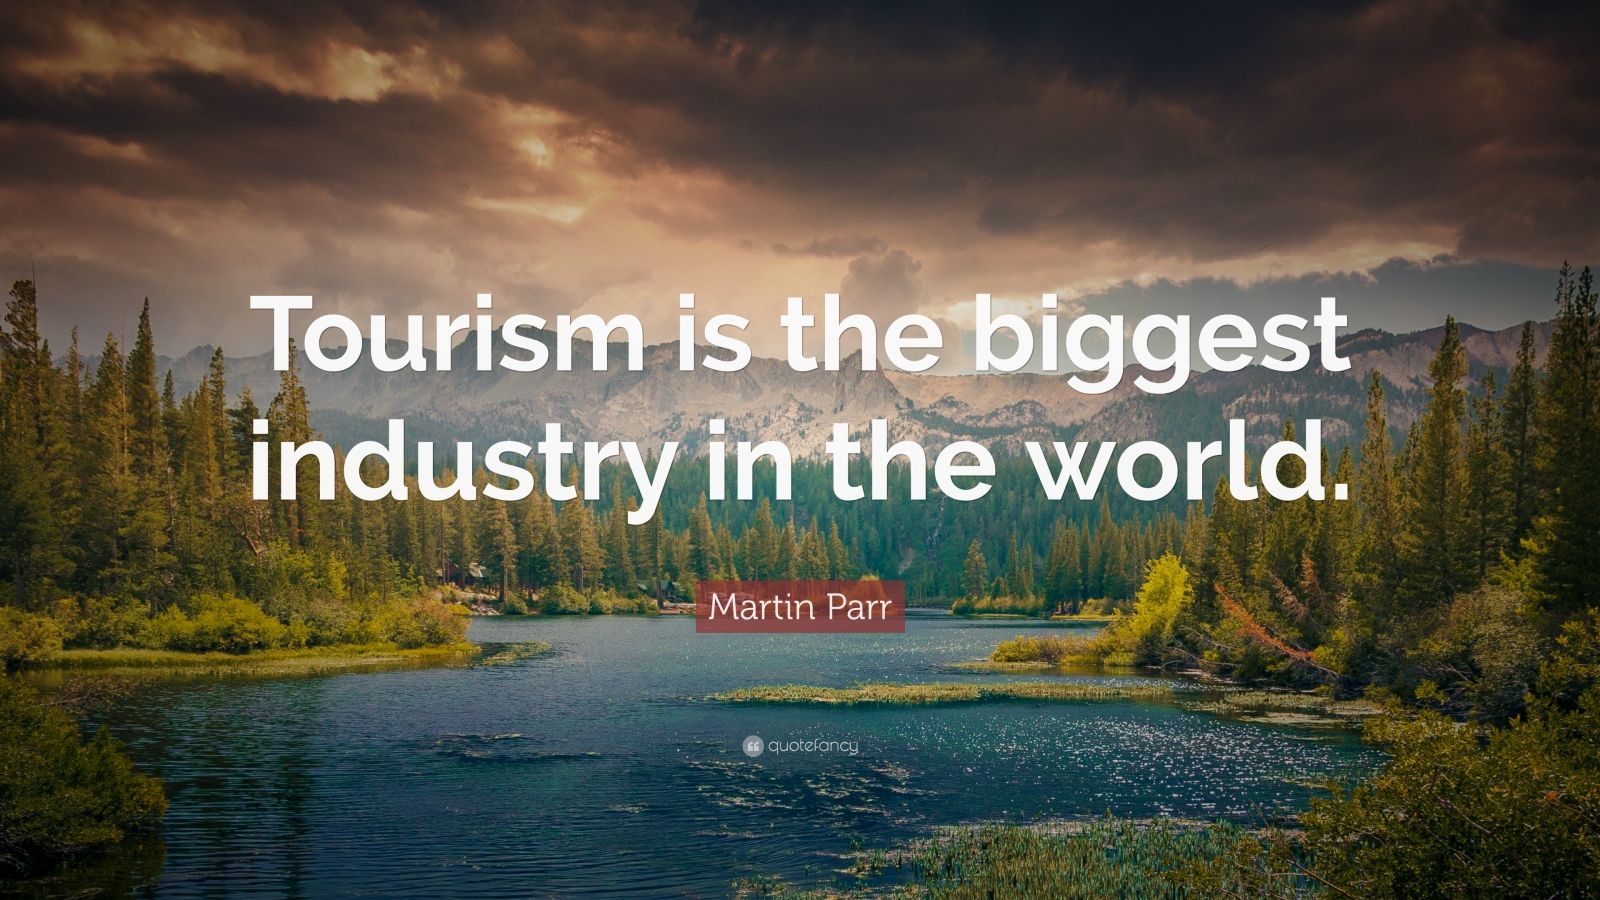 tourism quotes by famous personalities